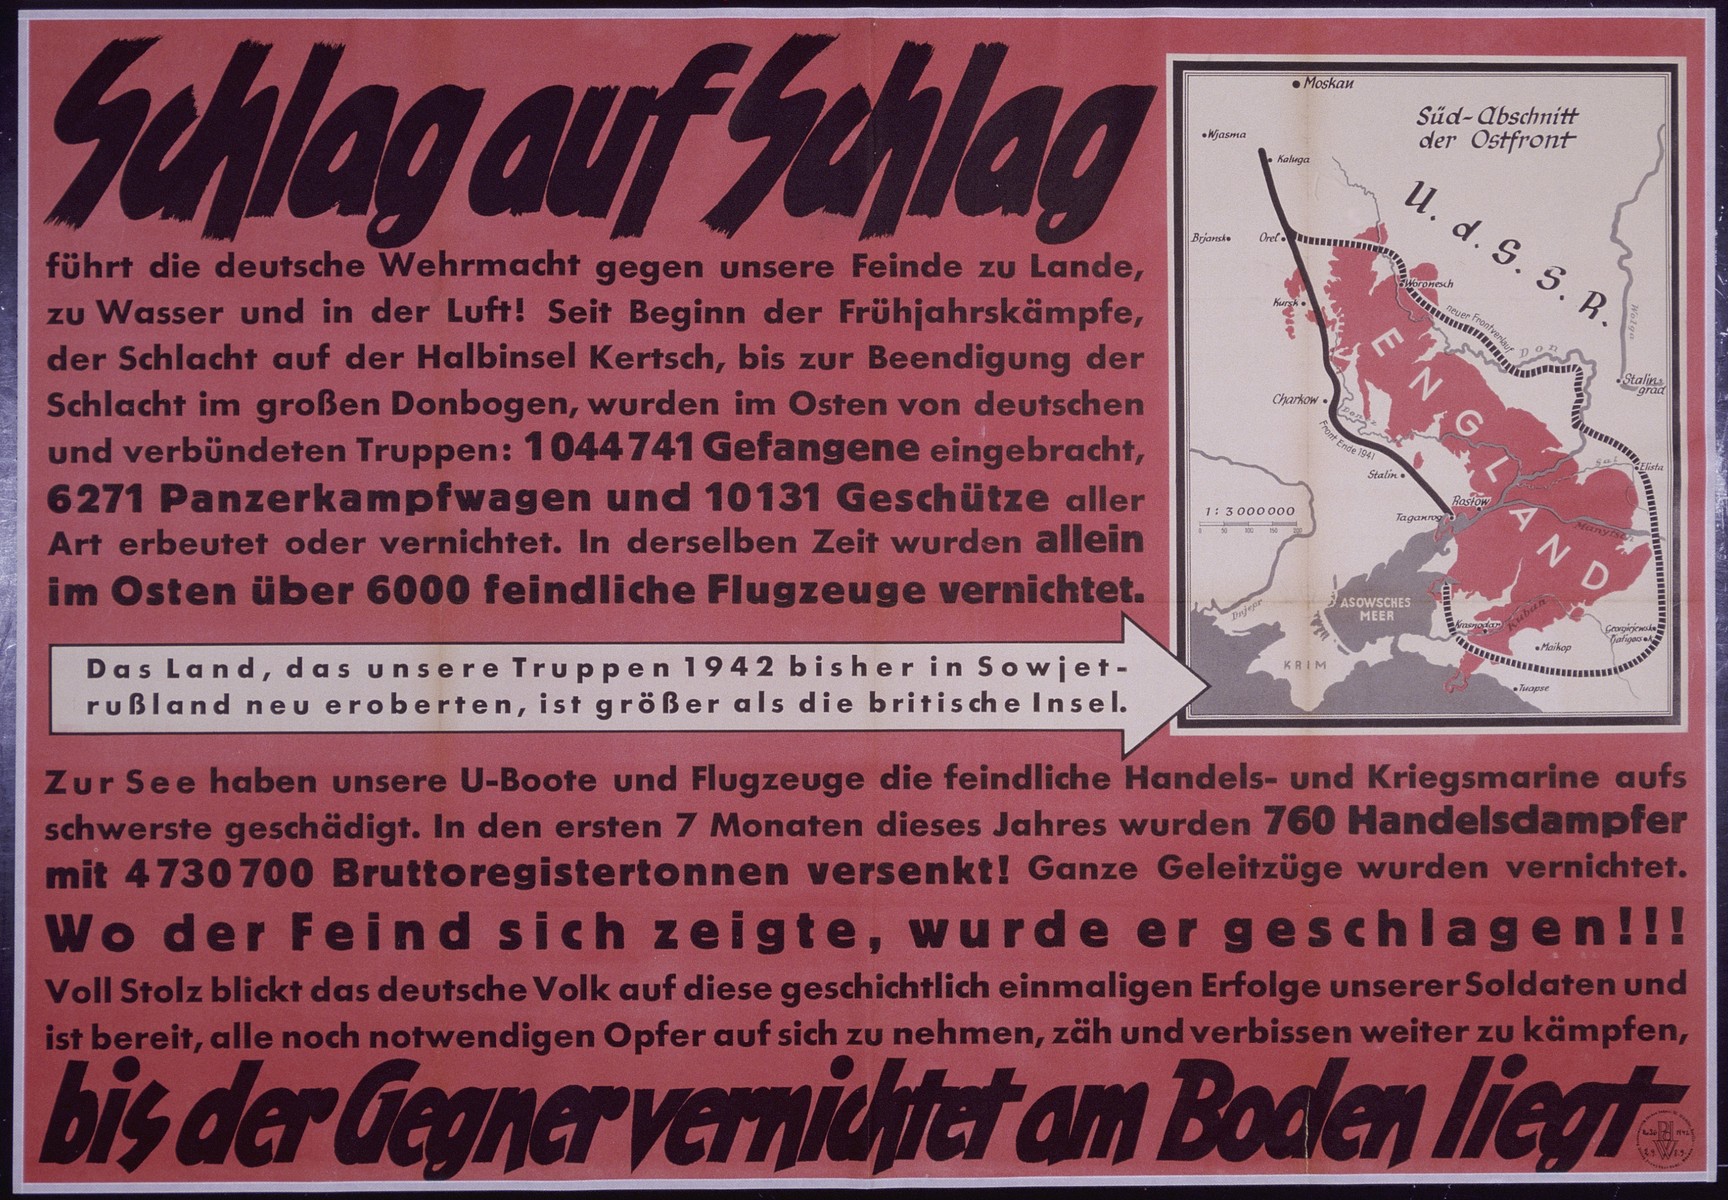 Nazi propaganda poster entitled, "Schlag auf Schlag," issued by the "Parole der Woche," a wall newspaper (Wandzeitung) published by the National Socialist Party propaganda office in Munich.